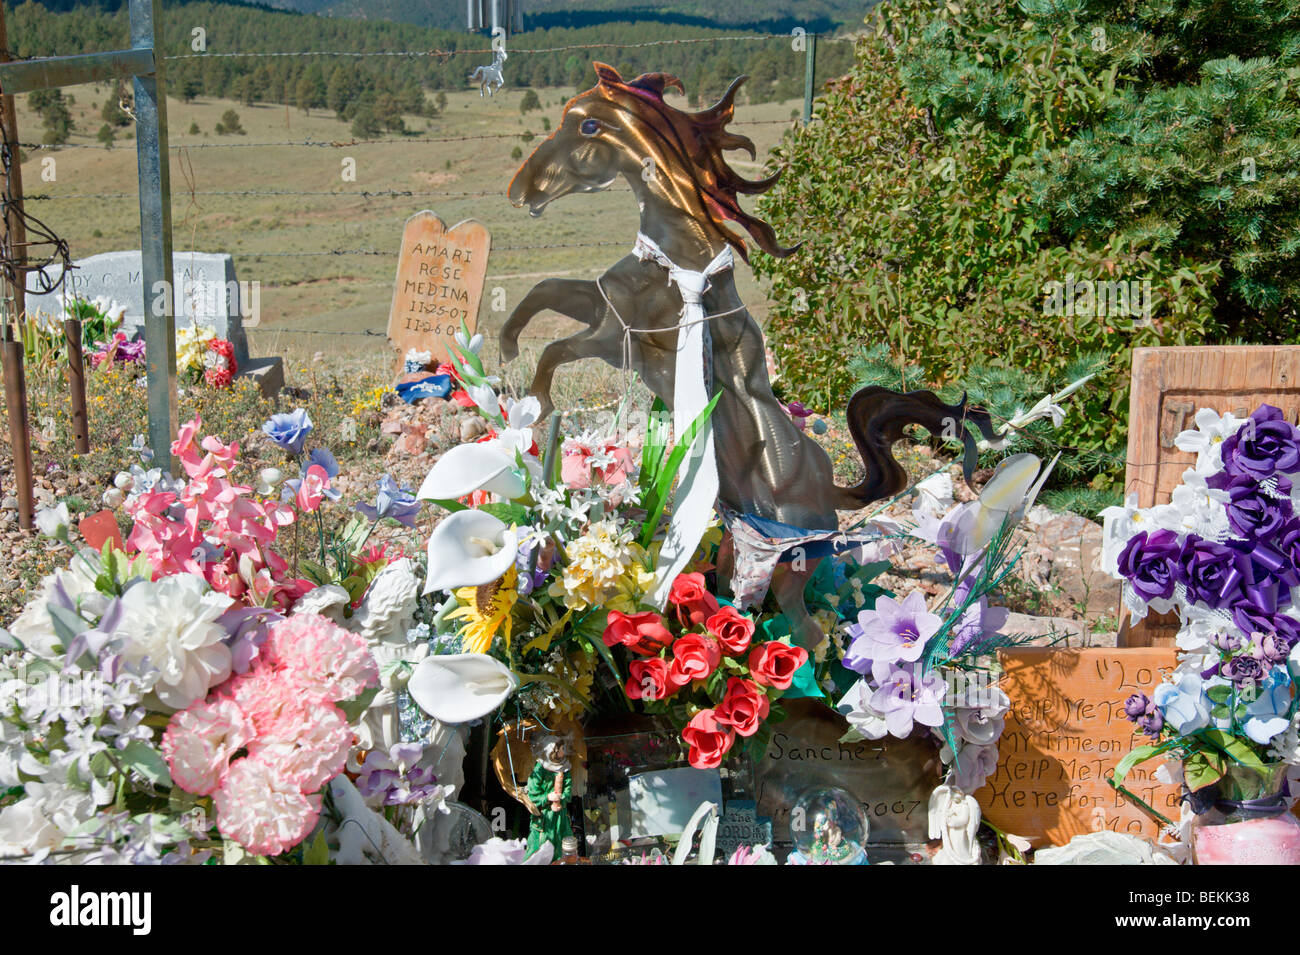 A colorful spray of flowers and a collection of unusual remembrances mark this resting place in the Elizabethtown cemetery - NM. Stock Photo